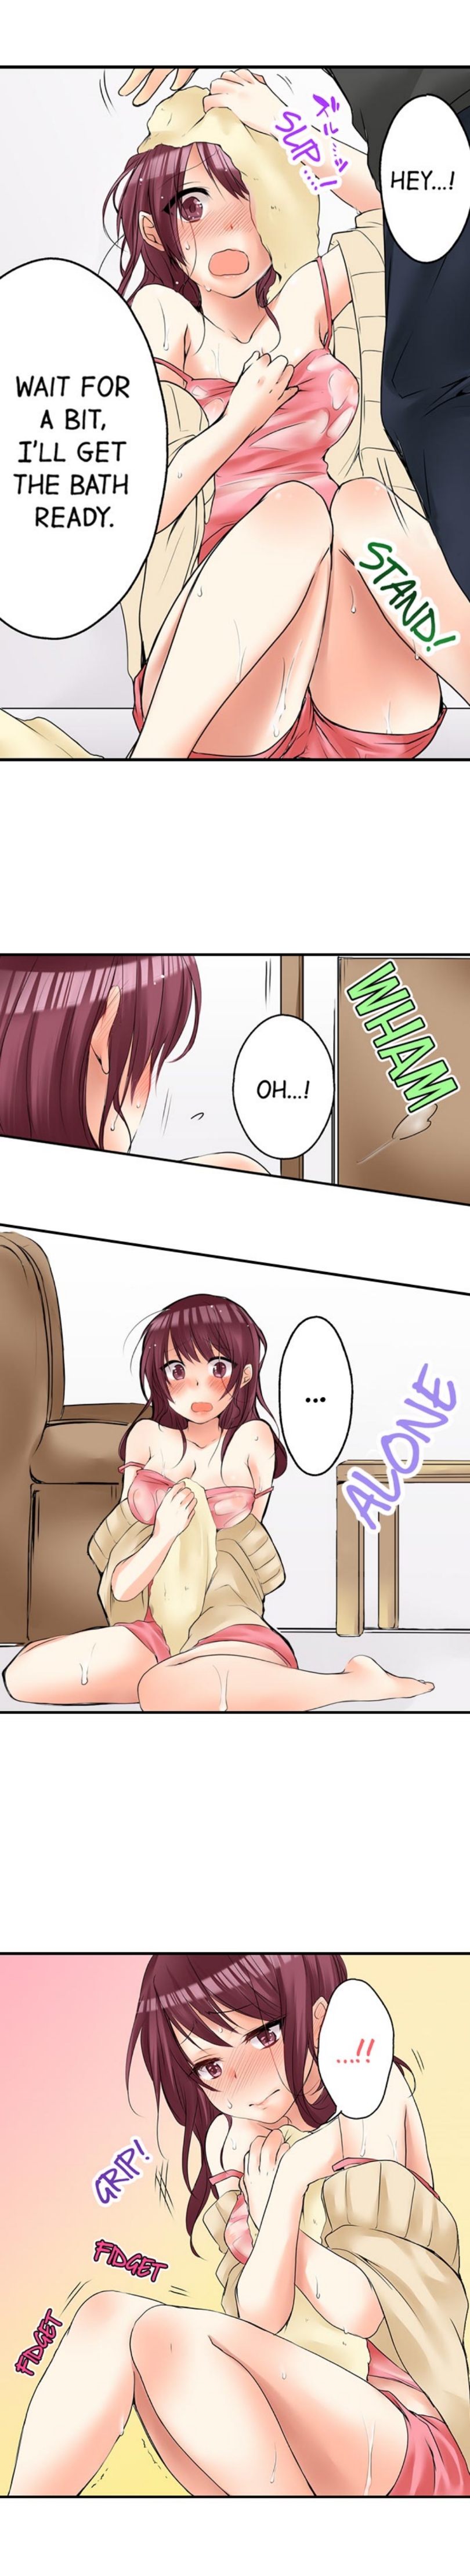 [Kouno Aya] I Did Naughty Things With My (Drunk) Sister (Ongoing) [煌乃あや] 姉貴(泥酔中)と…Hしちゃいました。